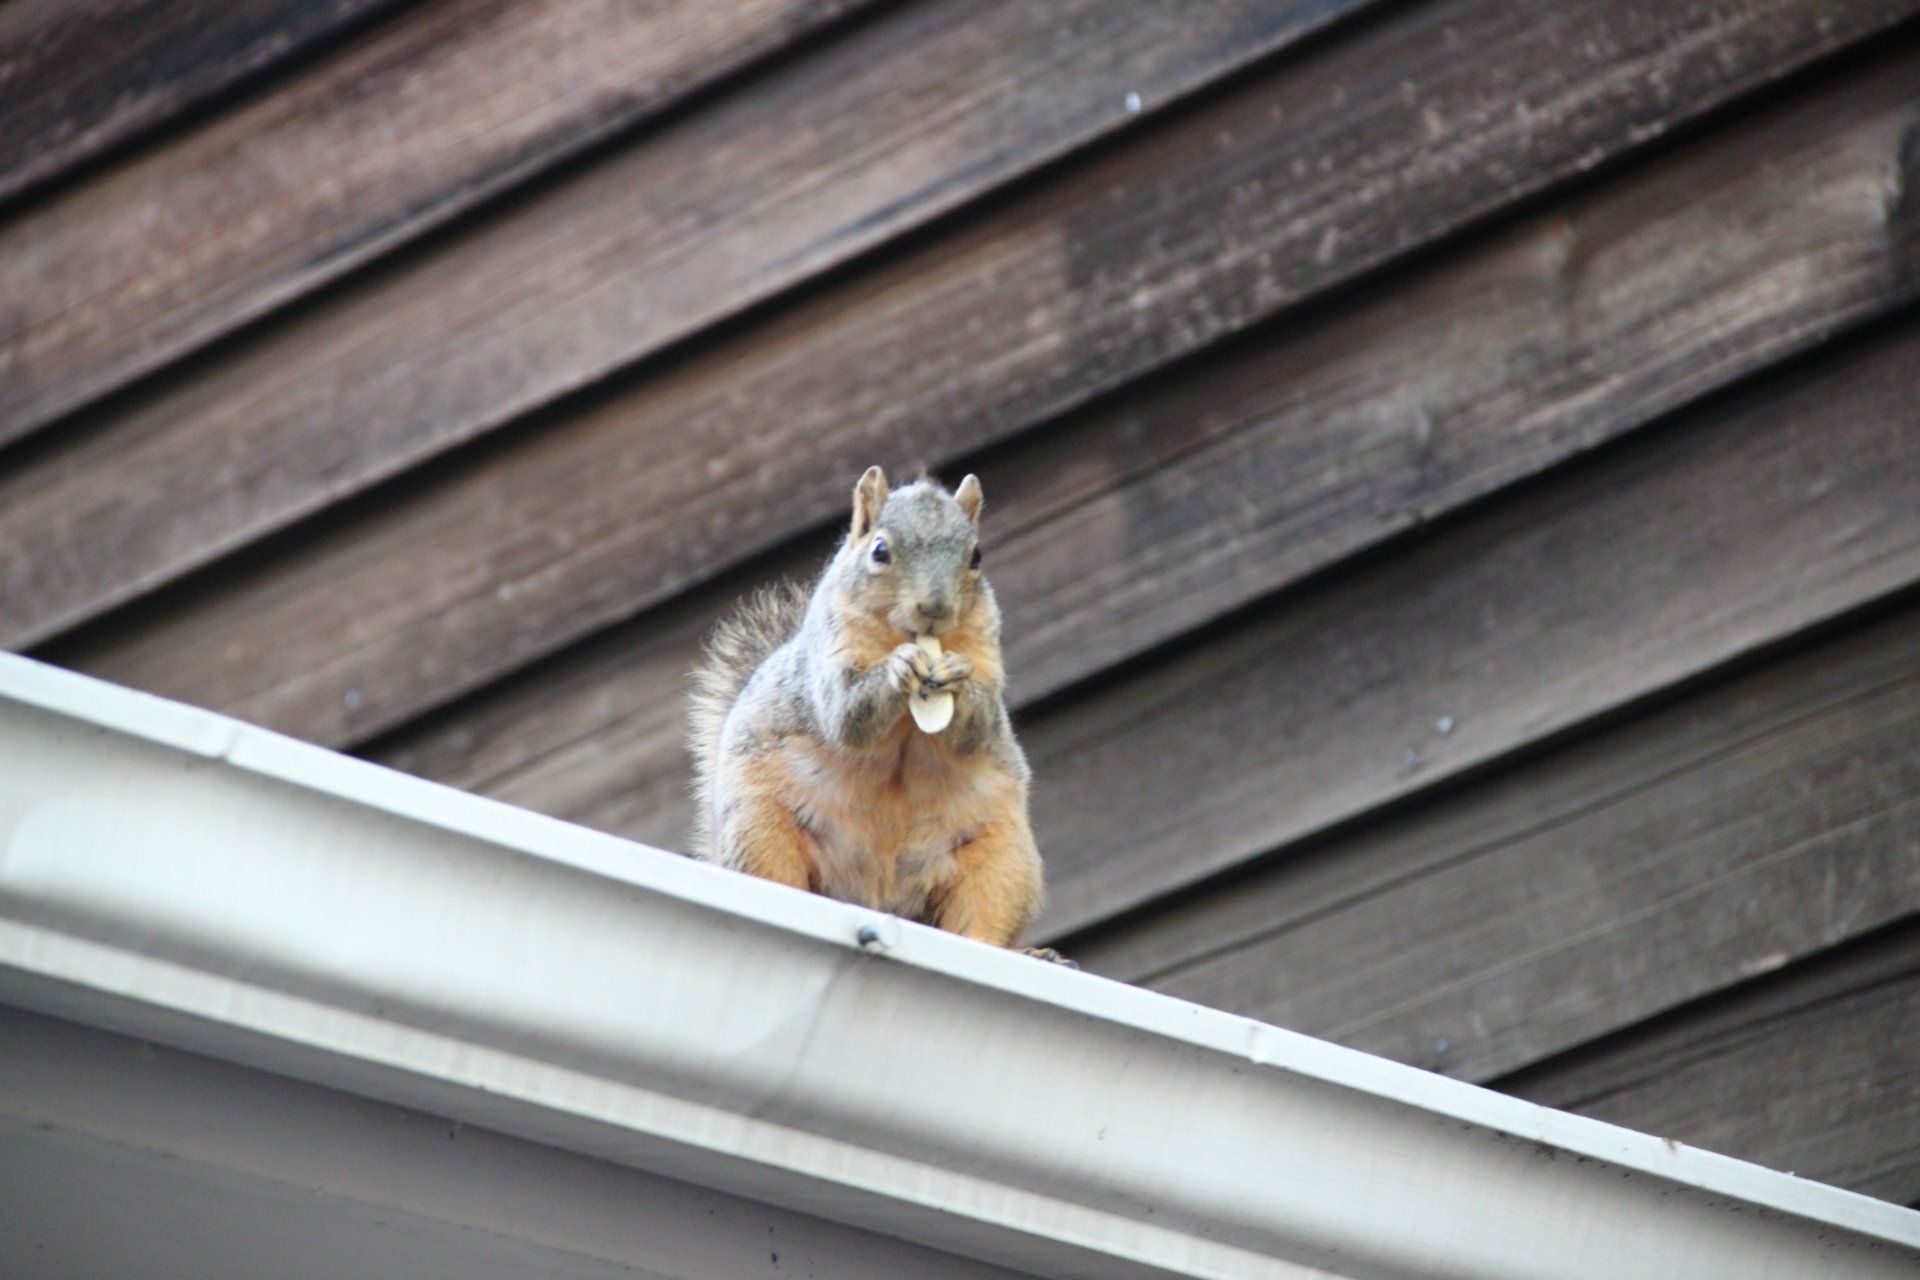 Northern Illinois — Squirrel On Roof Eating Nuts in Crystal Lake, IL